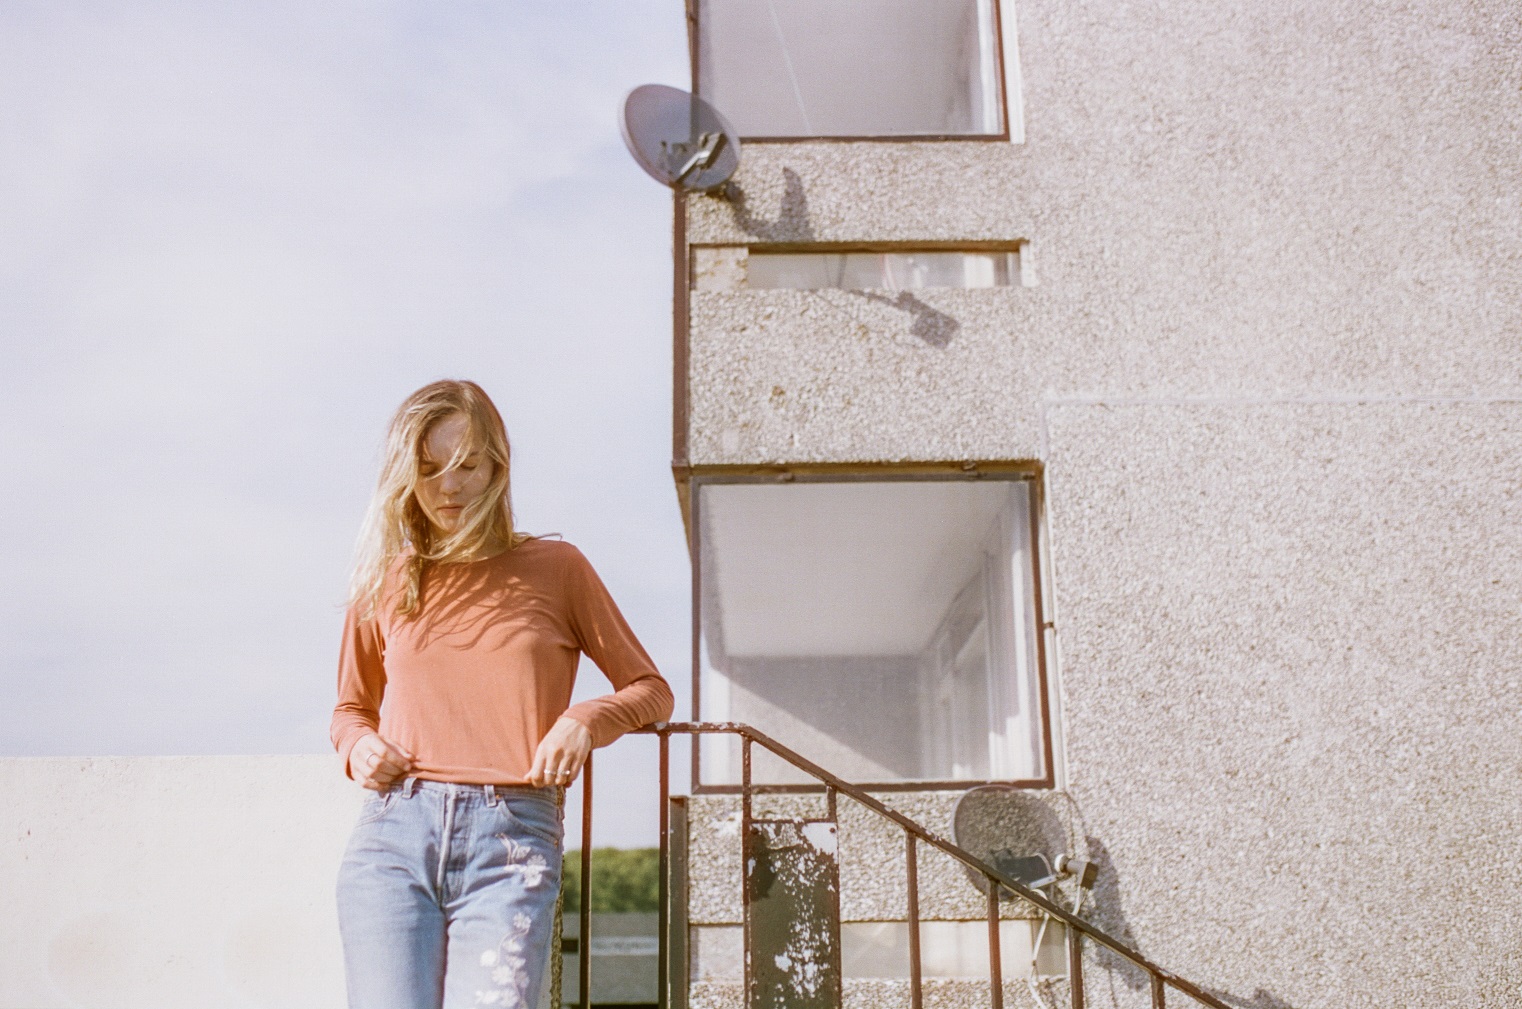 The Japanese House © Danny North